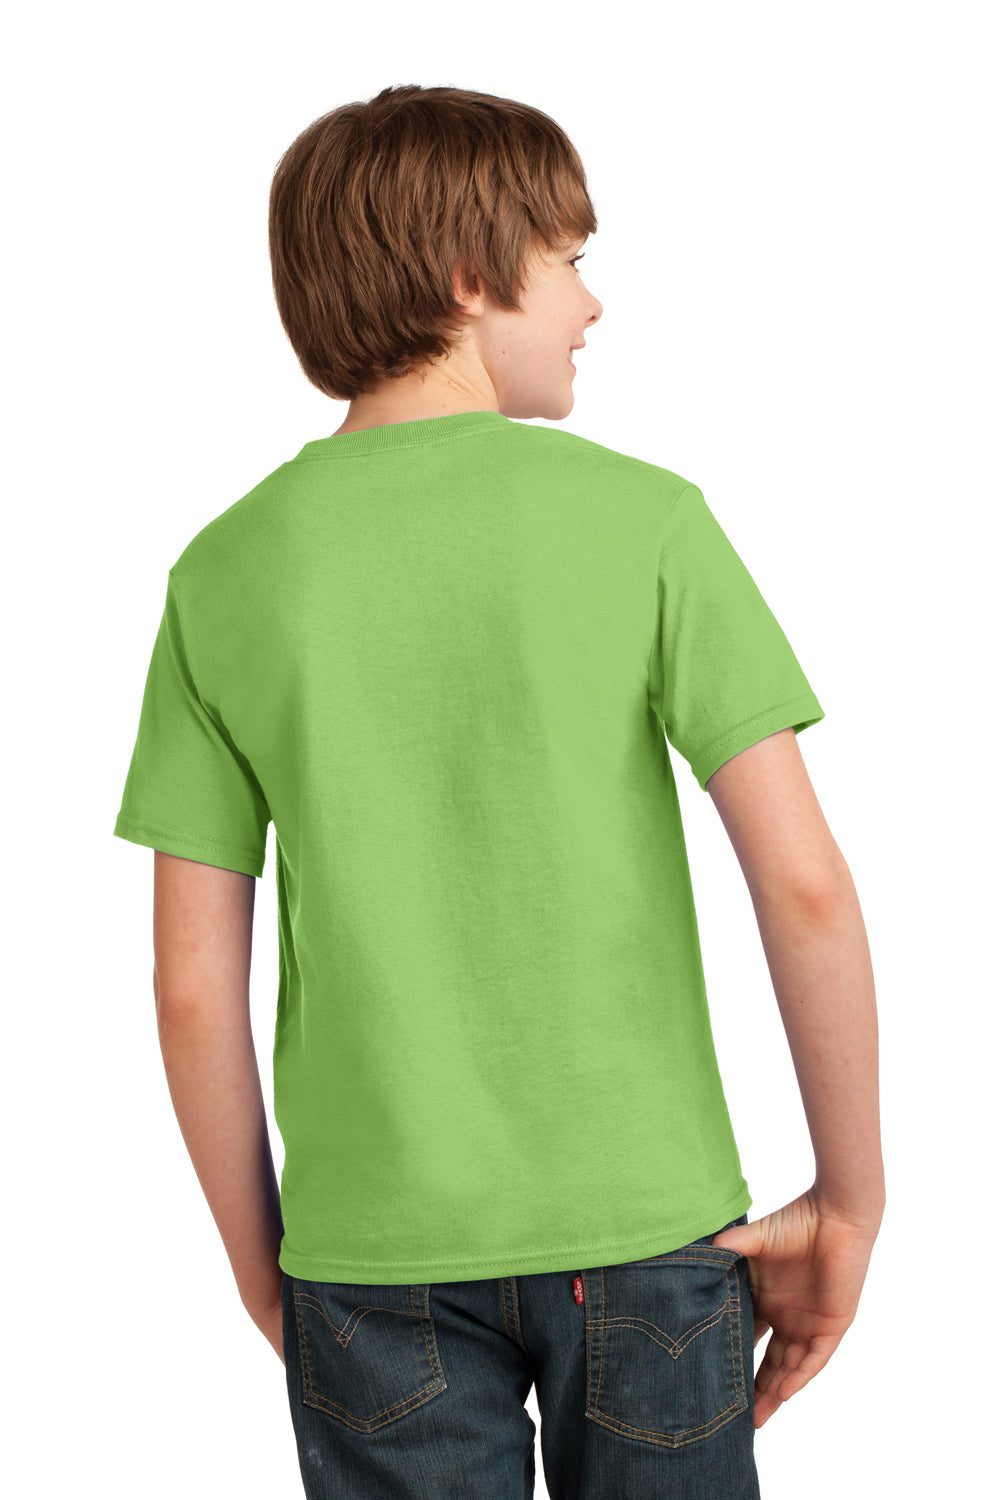 Port & Company PC61Y Youth Essential Short Sleeve Crewneck T-Shirt Lime Green Back